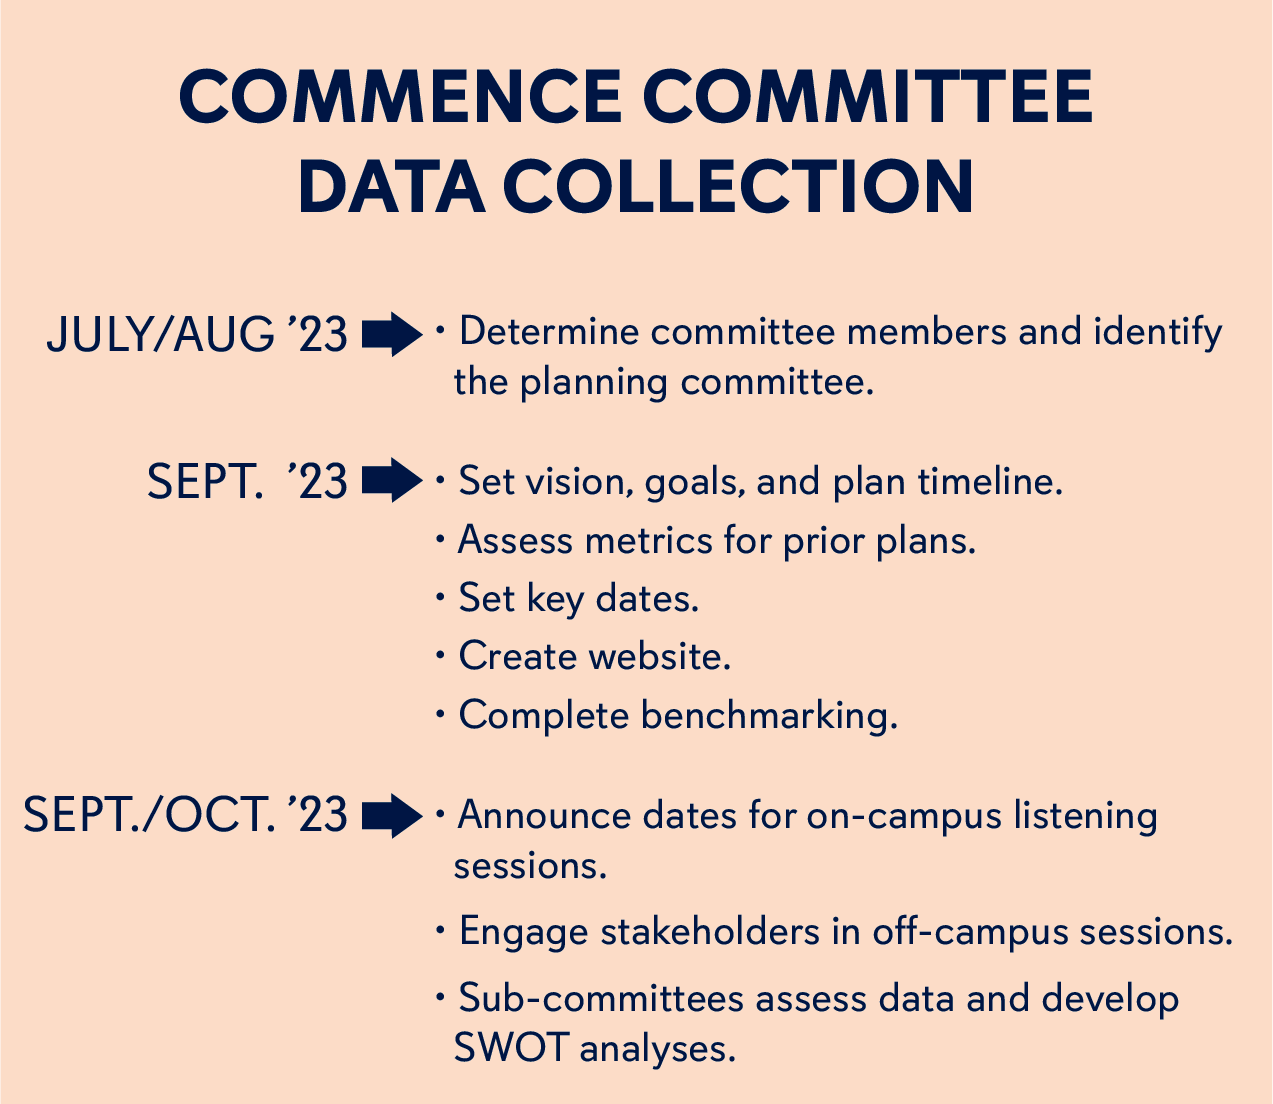 1. Determine committee members and the planning committee, 2. Set vision goals and plan timeline, assess metrics for prior plans, Set key dates, Create website, complete benchmarking 3. Announce listening sessions, offcampus sessions, SWOT analyses